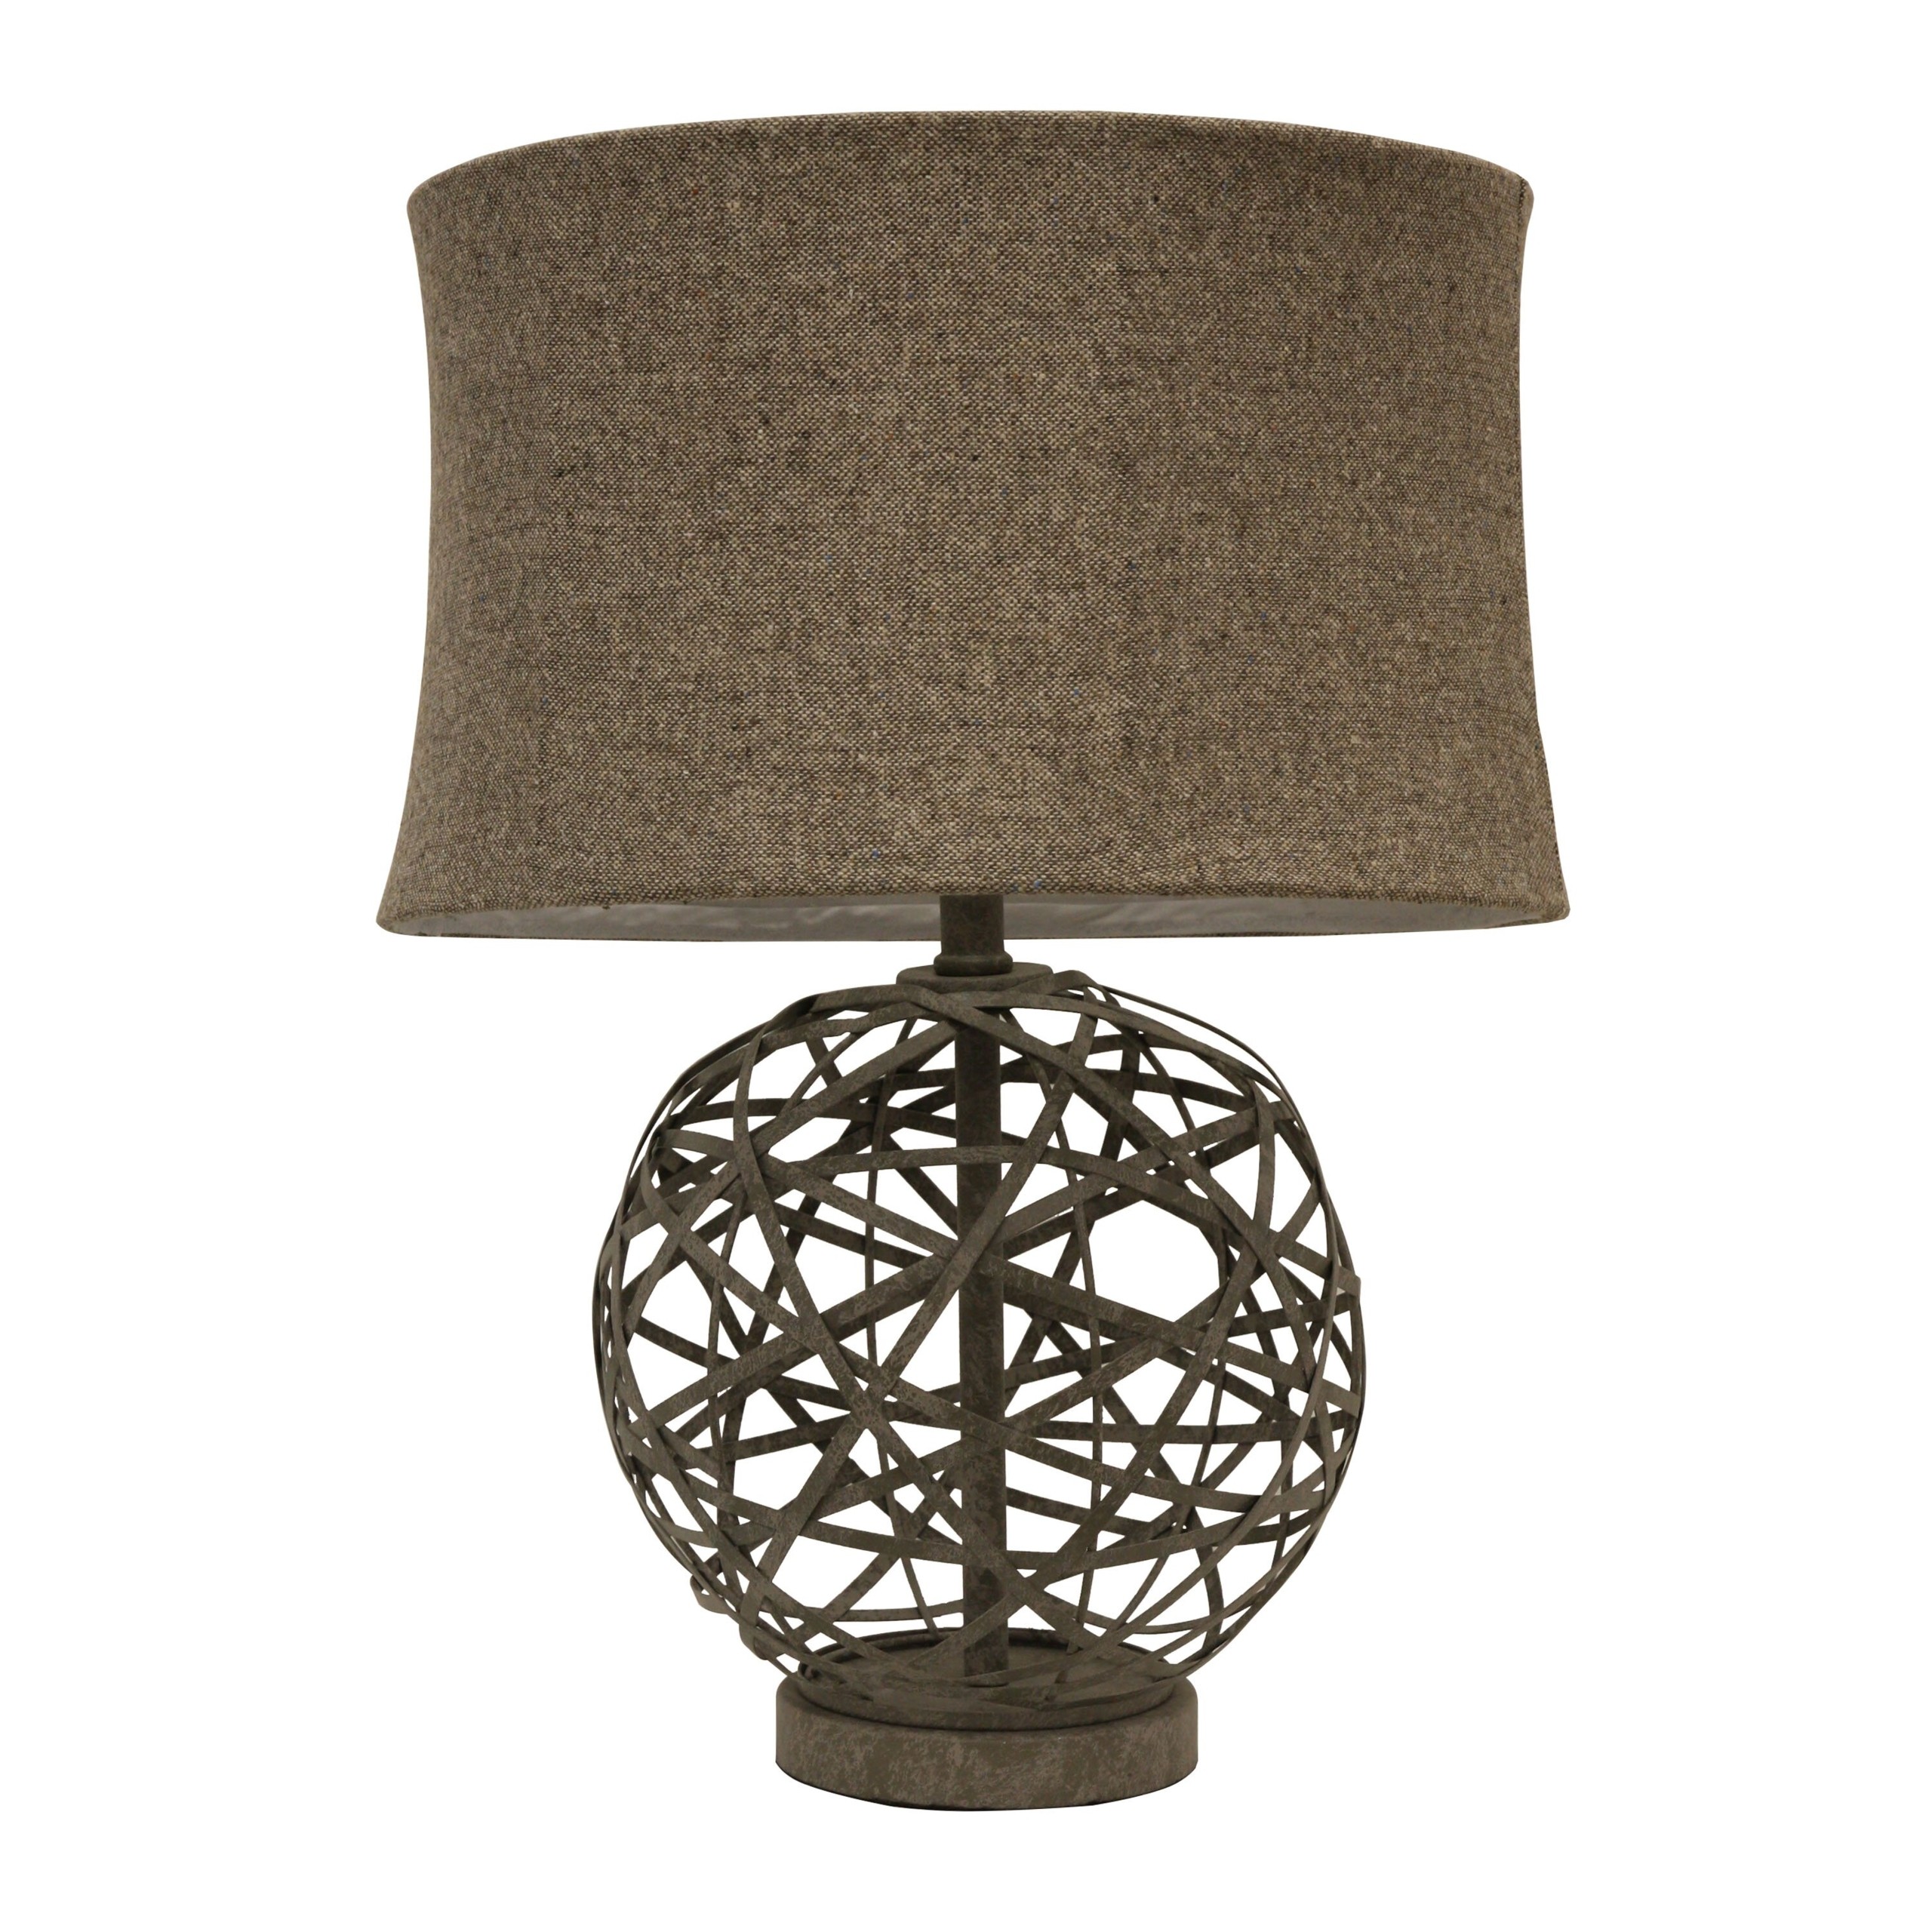 Strapped Steel Ball 22" Table Lamp with Drum Shade